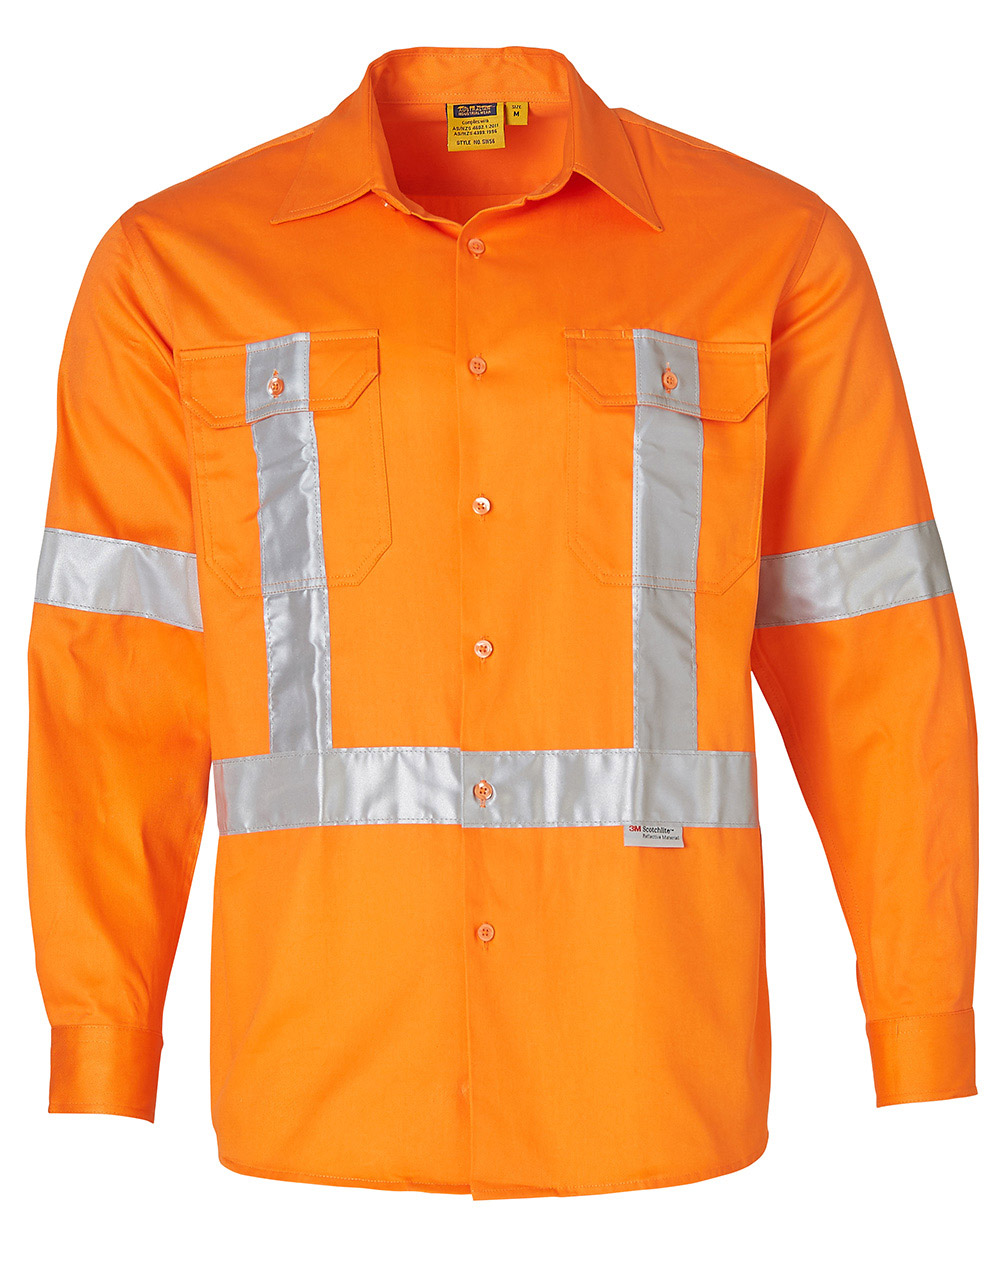 SW56 COTTON DRILL SAFETY SHIRT